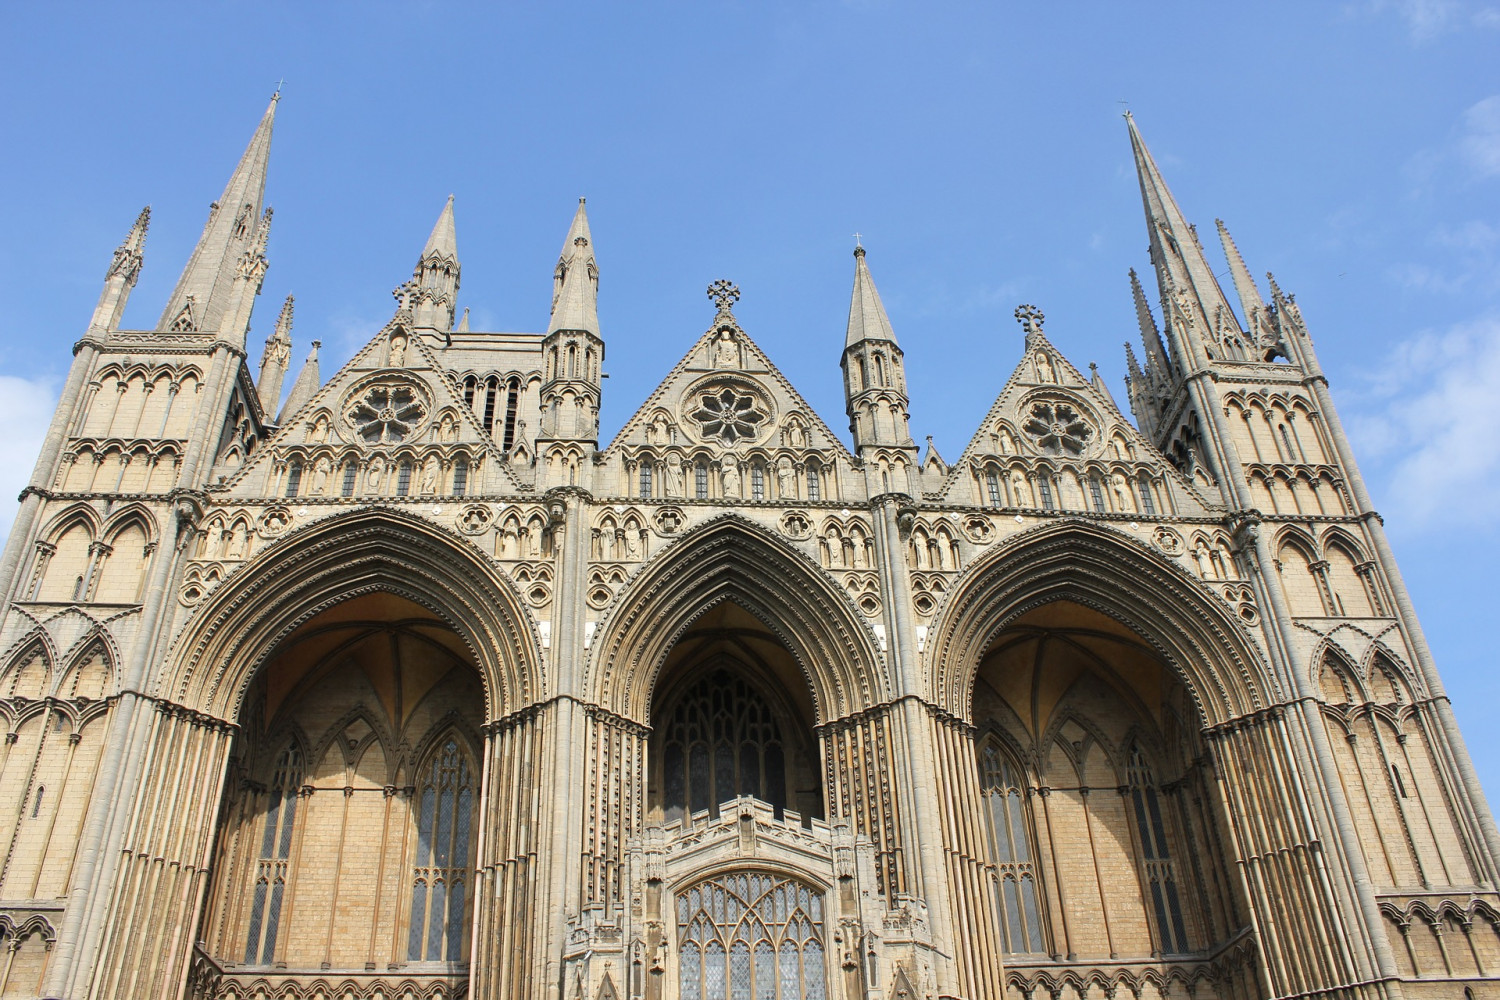 Outside of Peterborough Cathedral